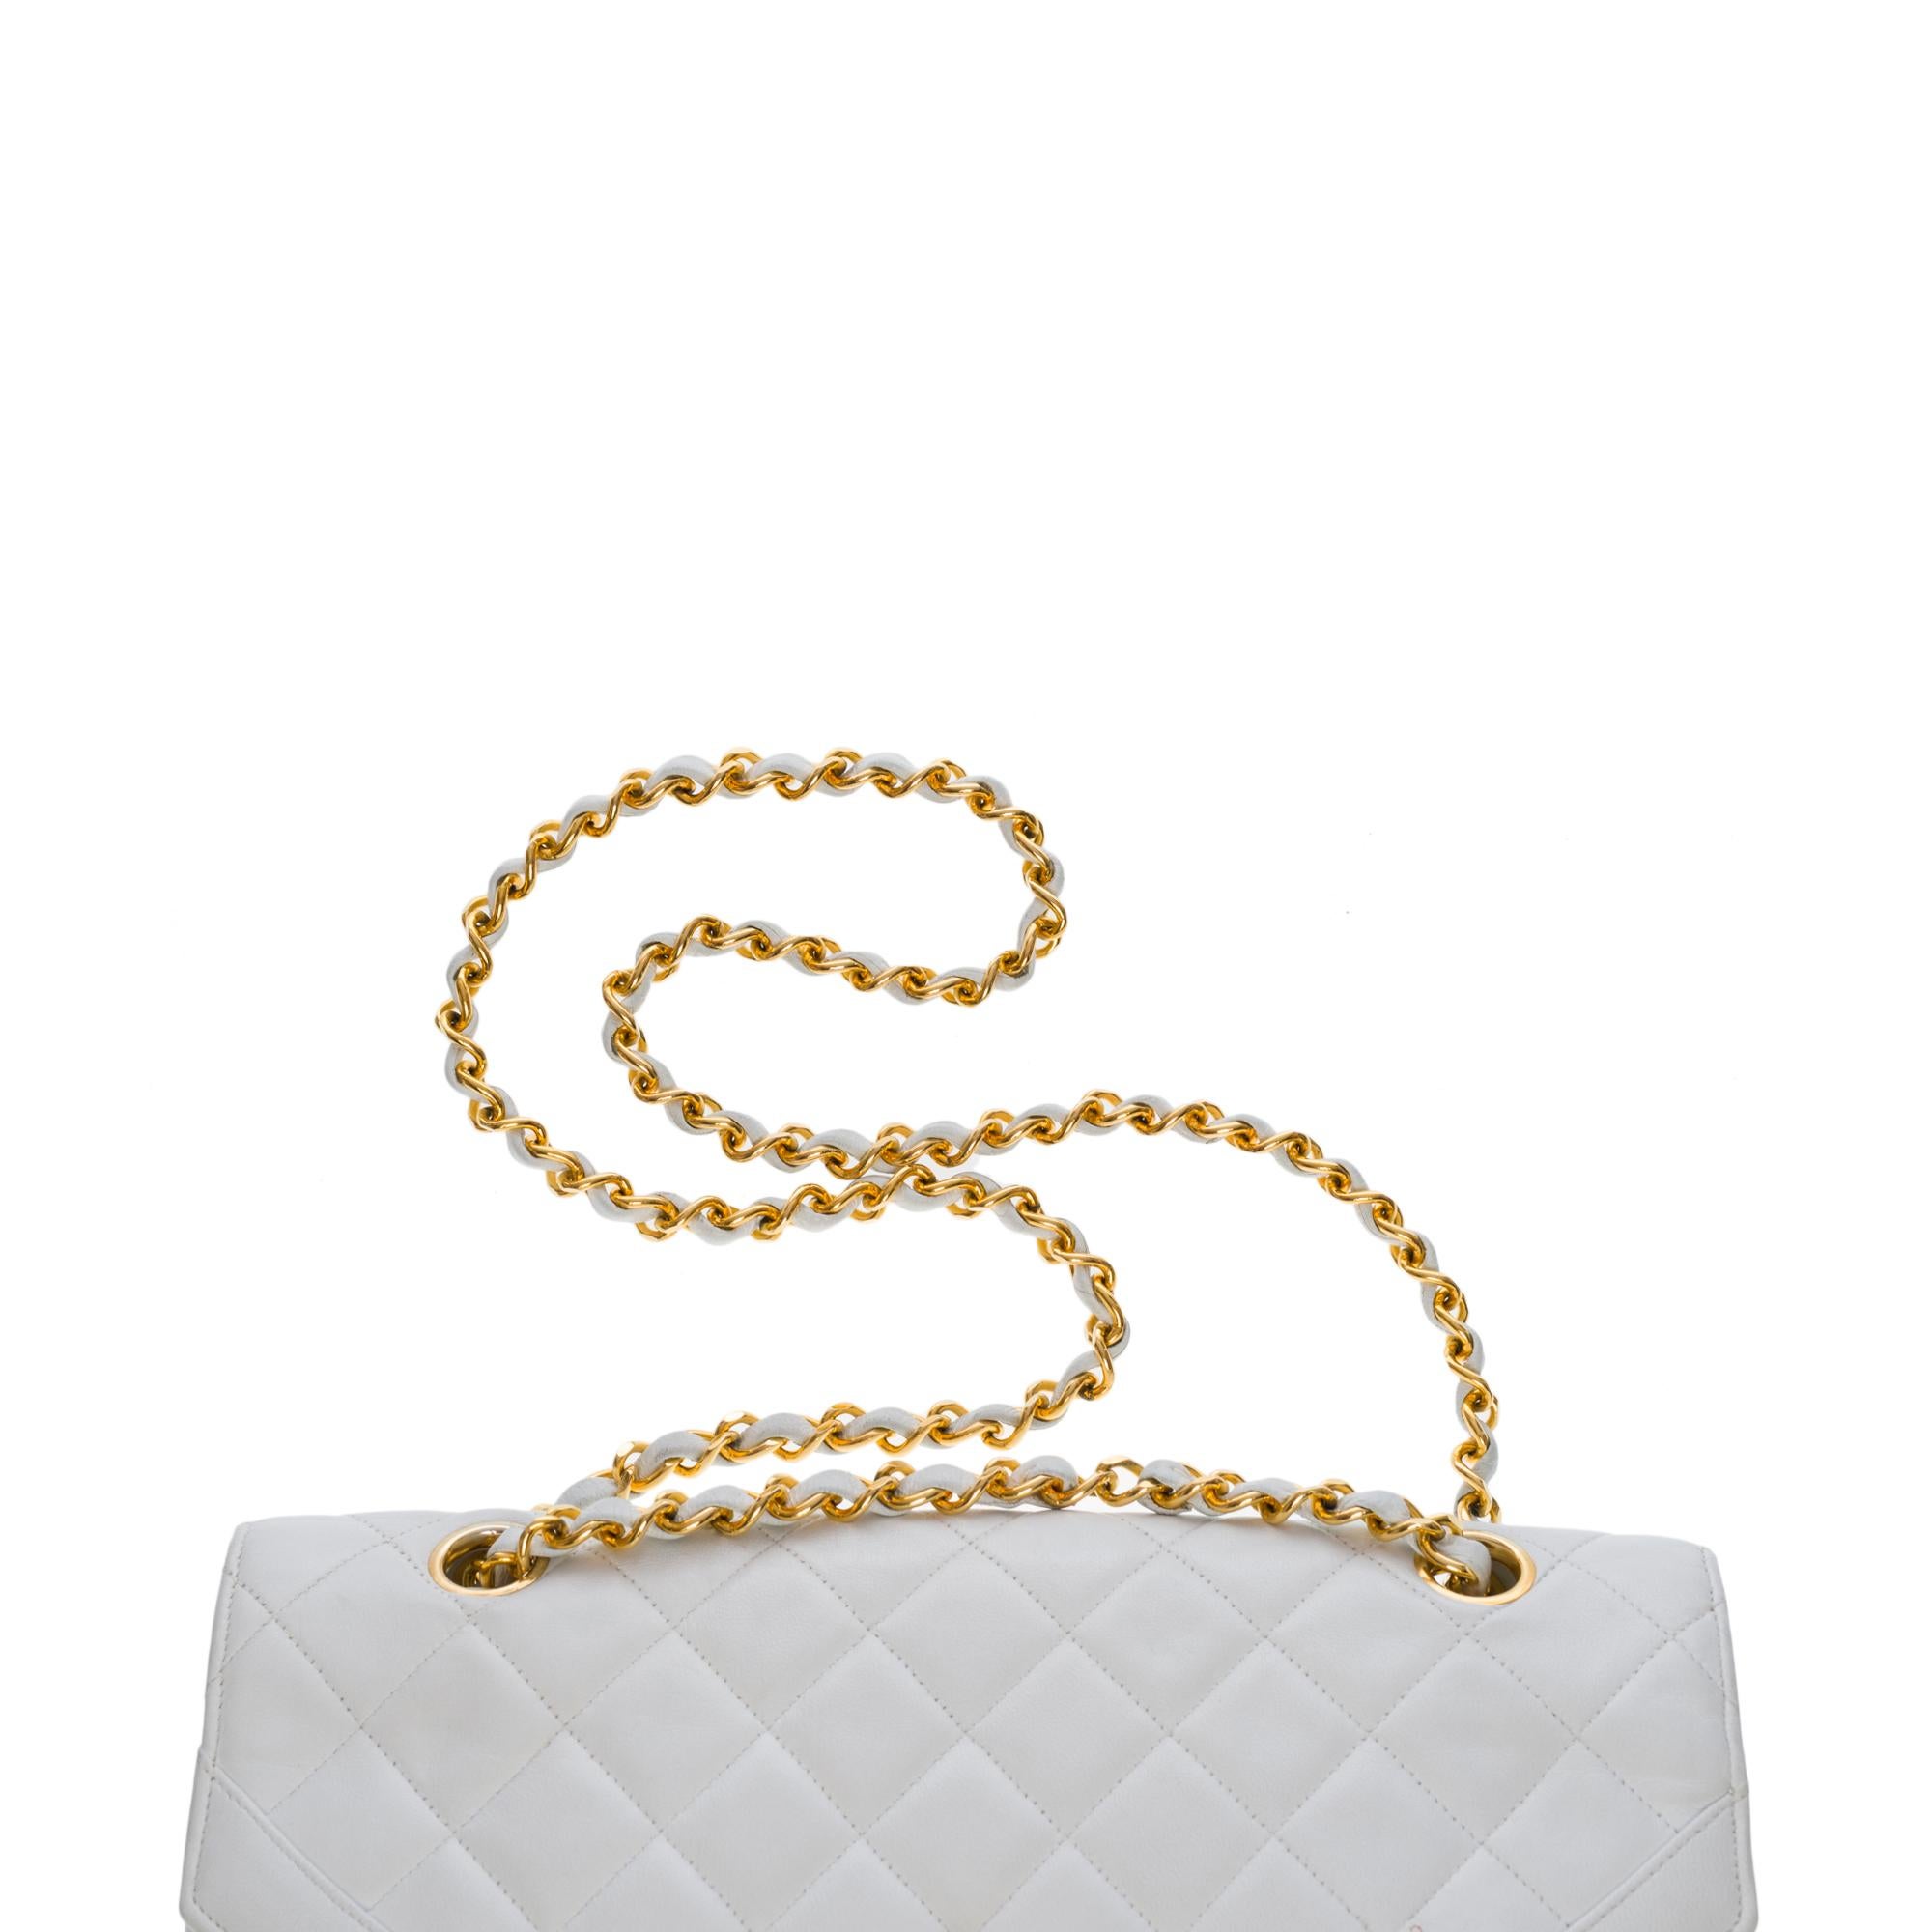 Amazing Chanel Classic single Flap shoulder bag in white quilted lambskin, GHW 2